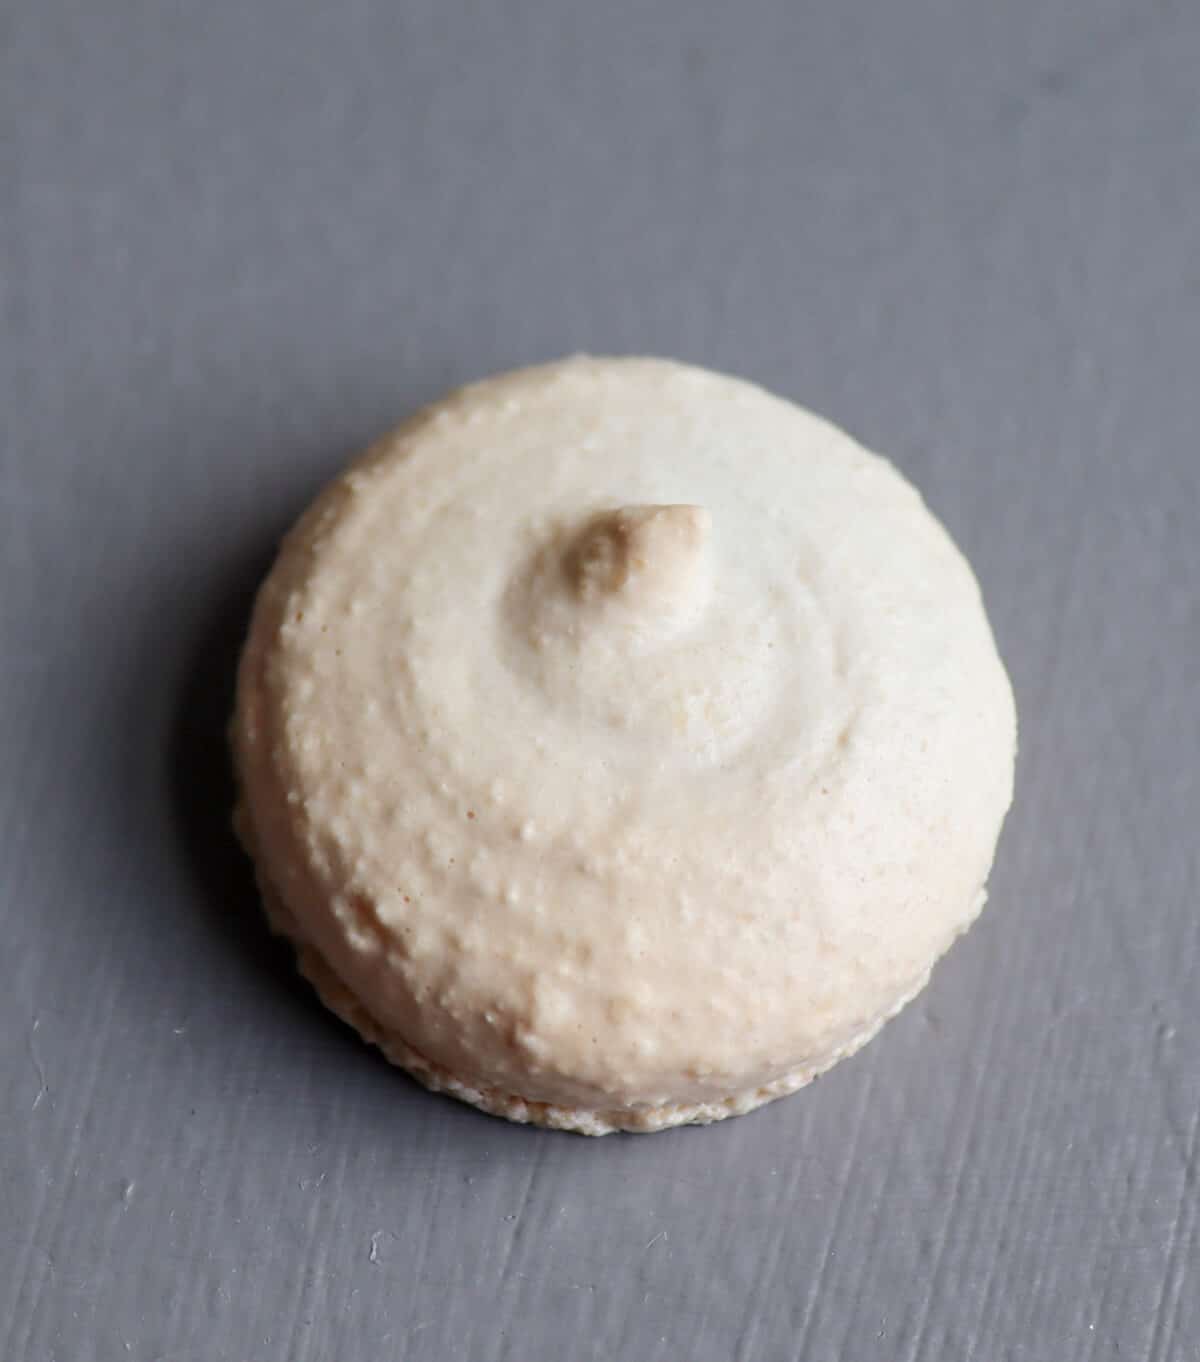 A macaron shell with the piping peak still visible.